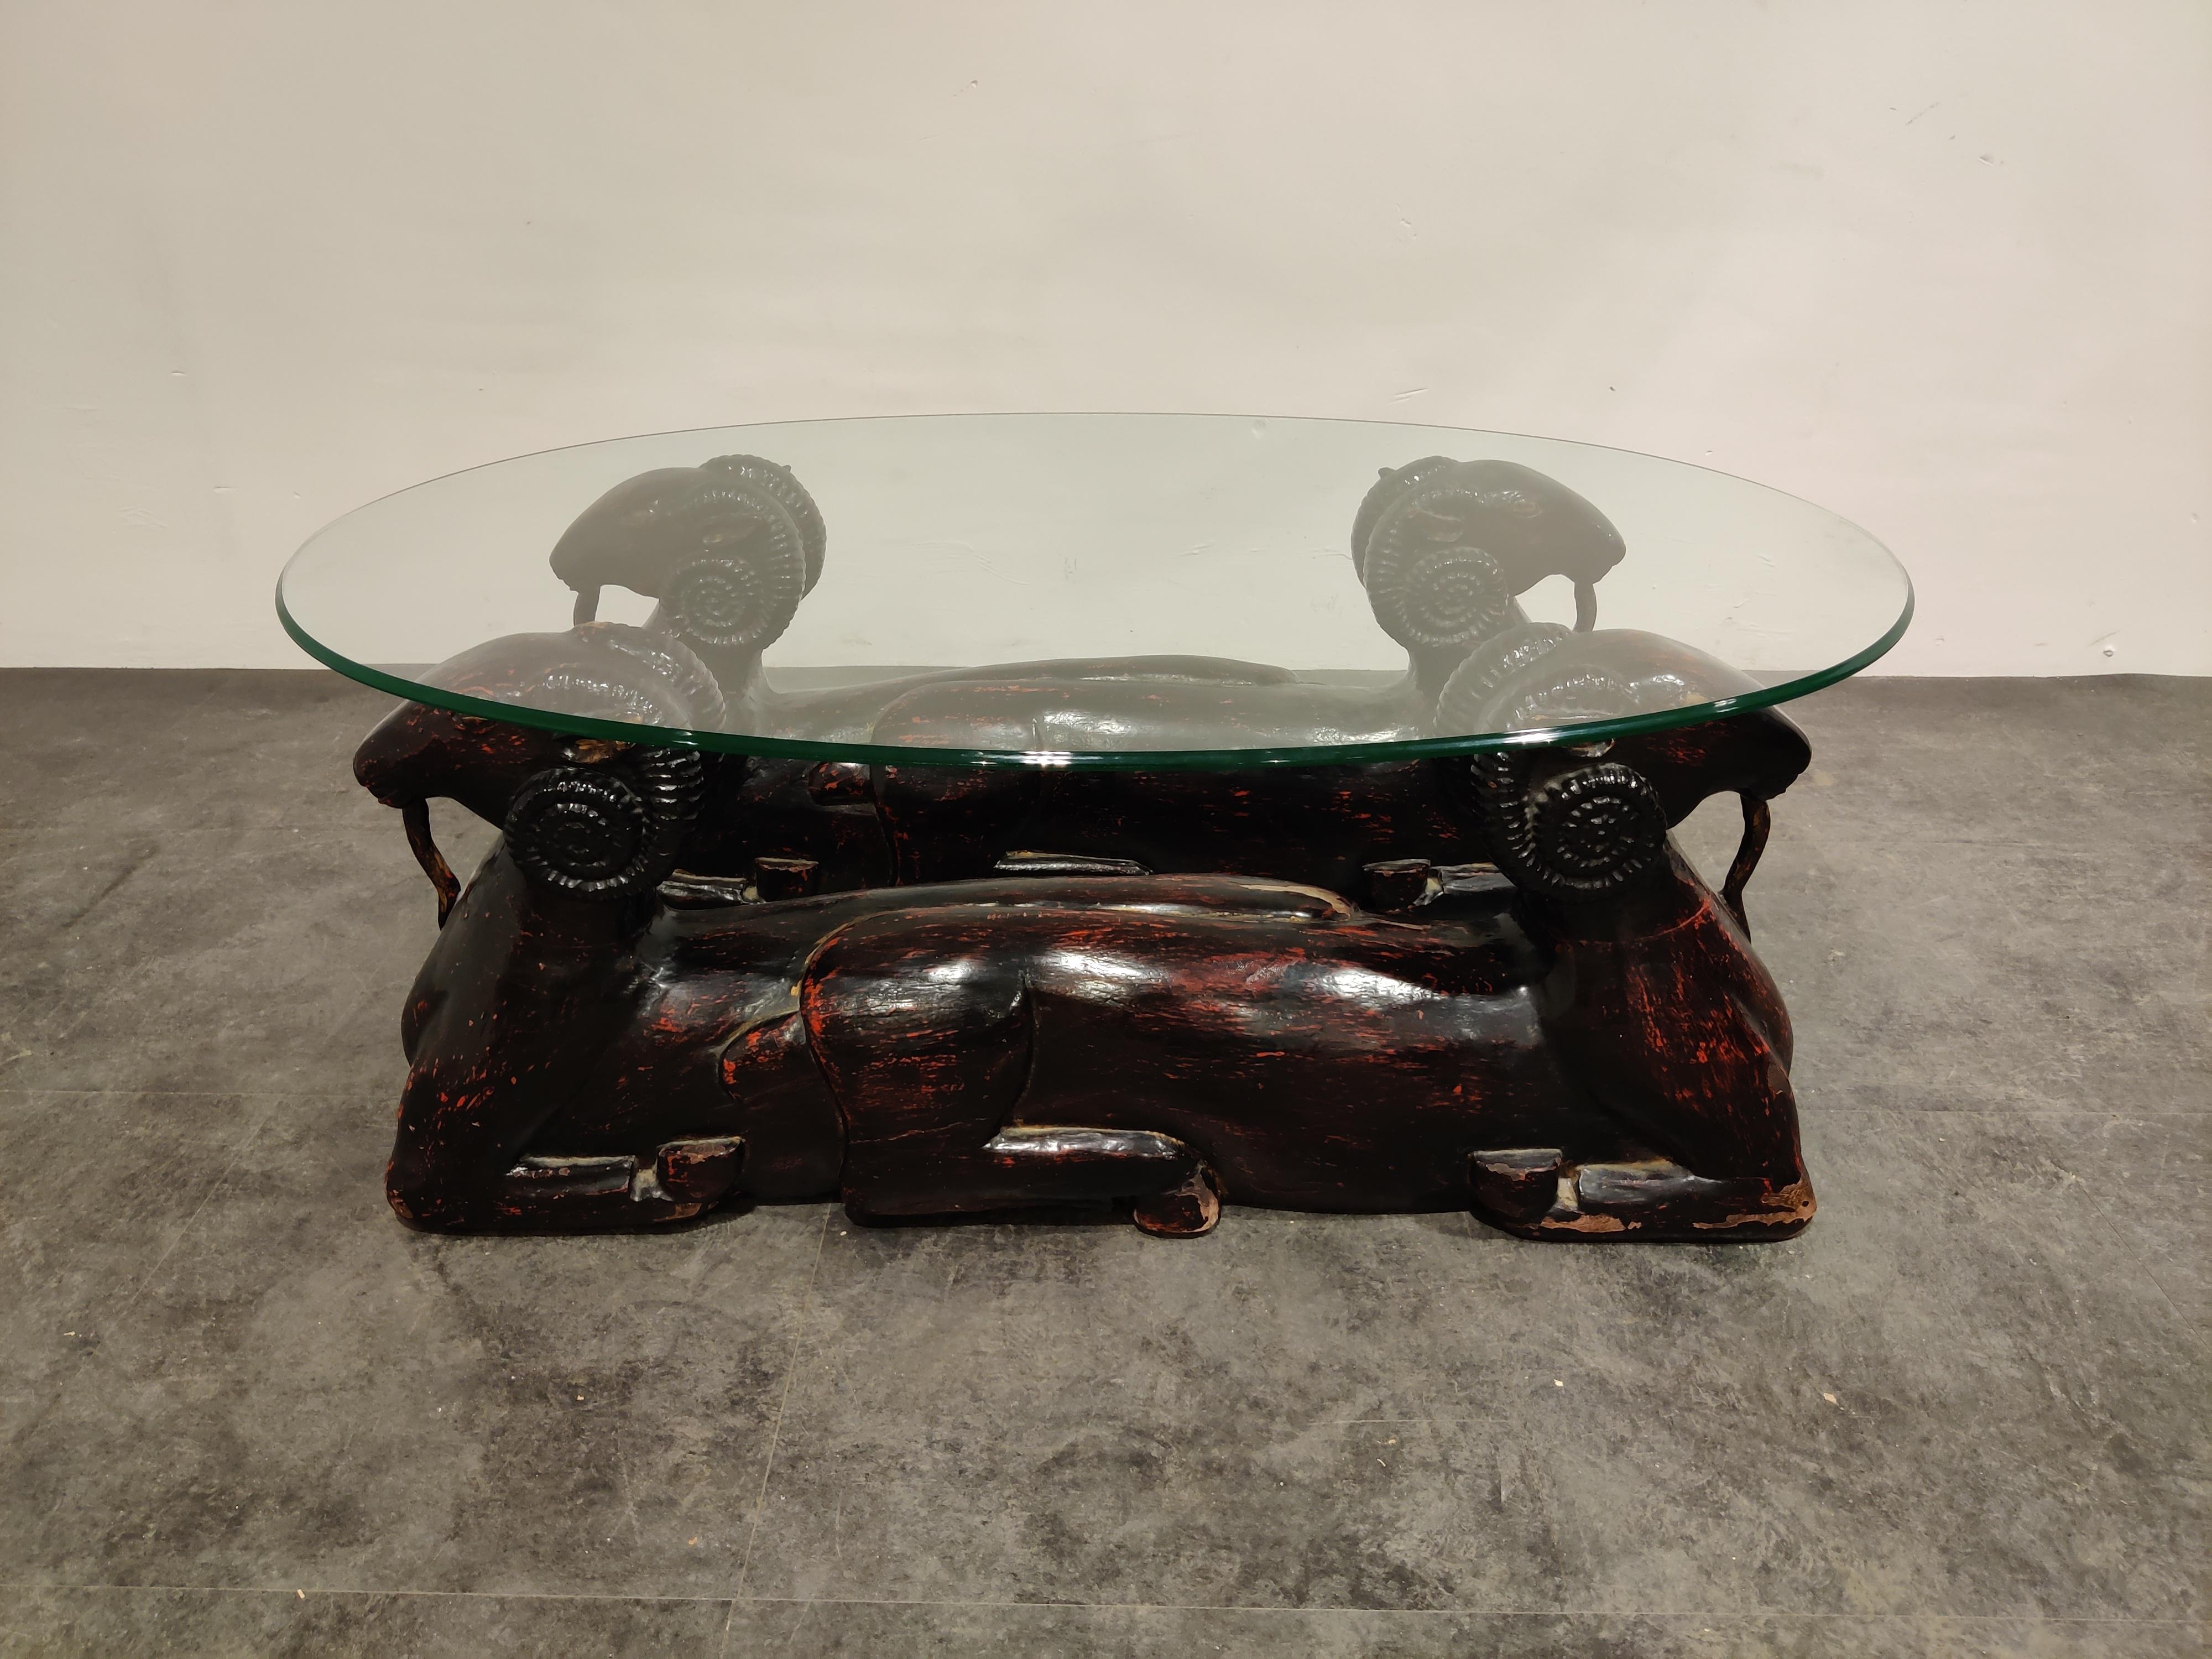 Vintage carved wooden double ram head coffee table.

Heavy wooden carved statues serve as a base for the oval clear glass top.

The bases have substantial paint loss, but this makes them look nice and old and really add a touch of charm.

The